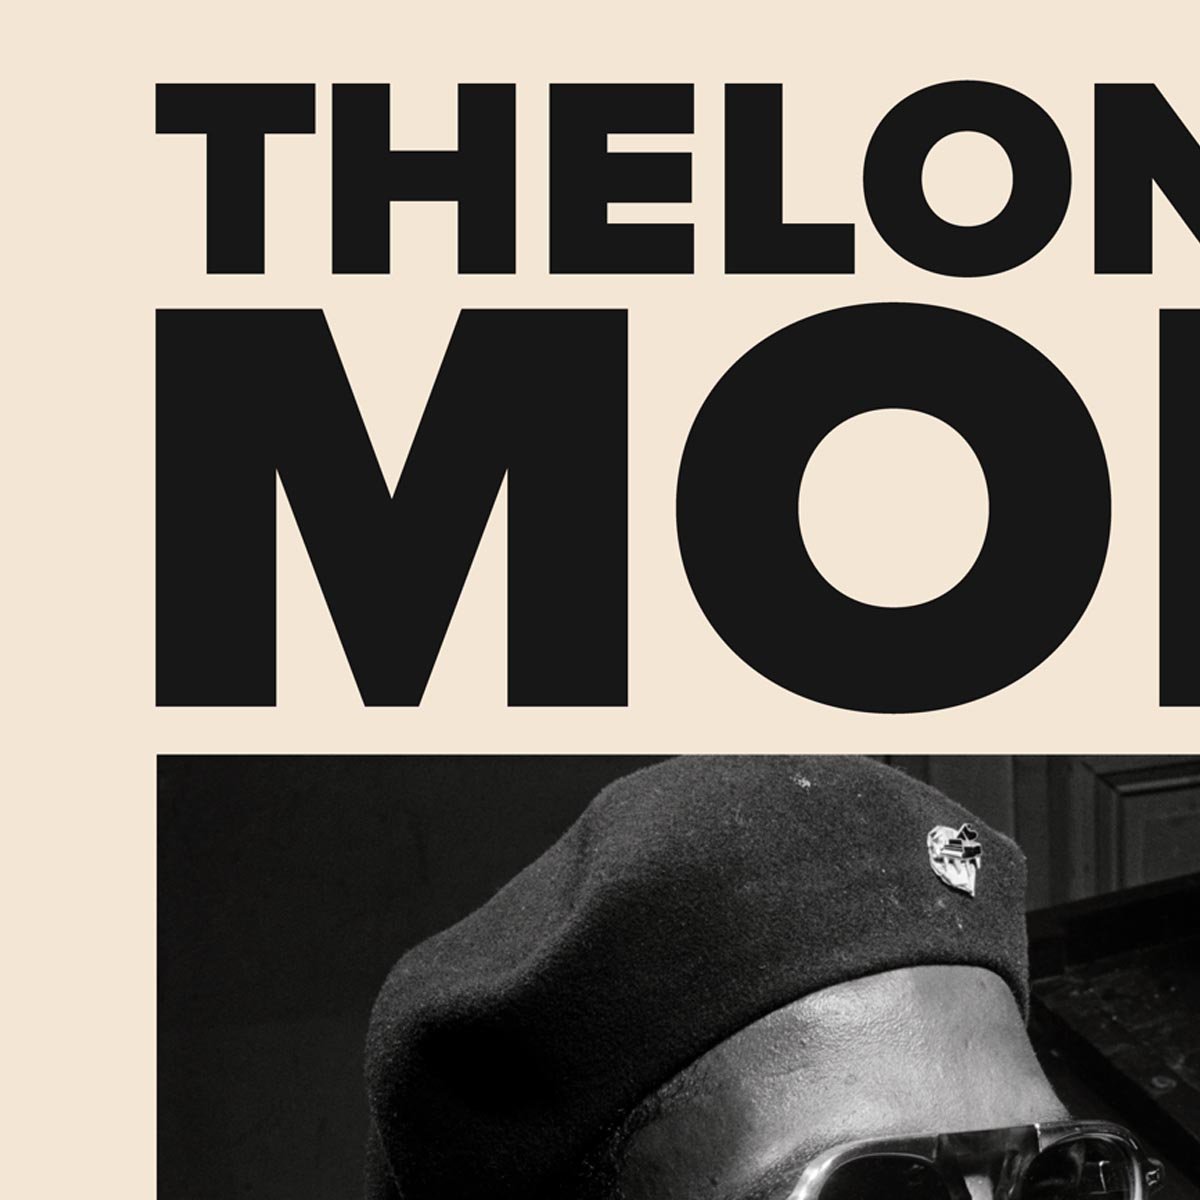 Thelonious Monk Jazz Concert Poster